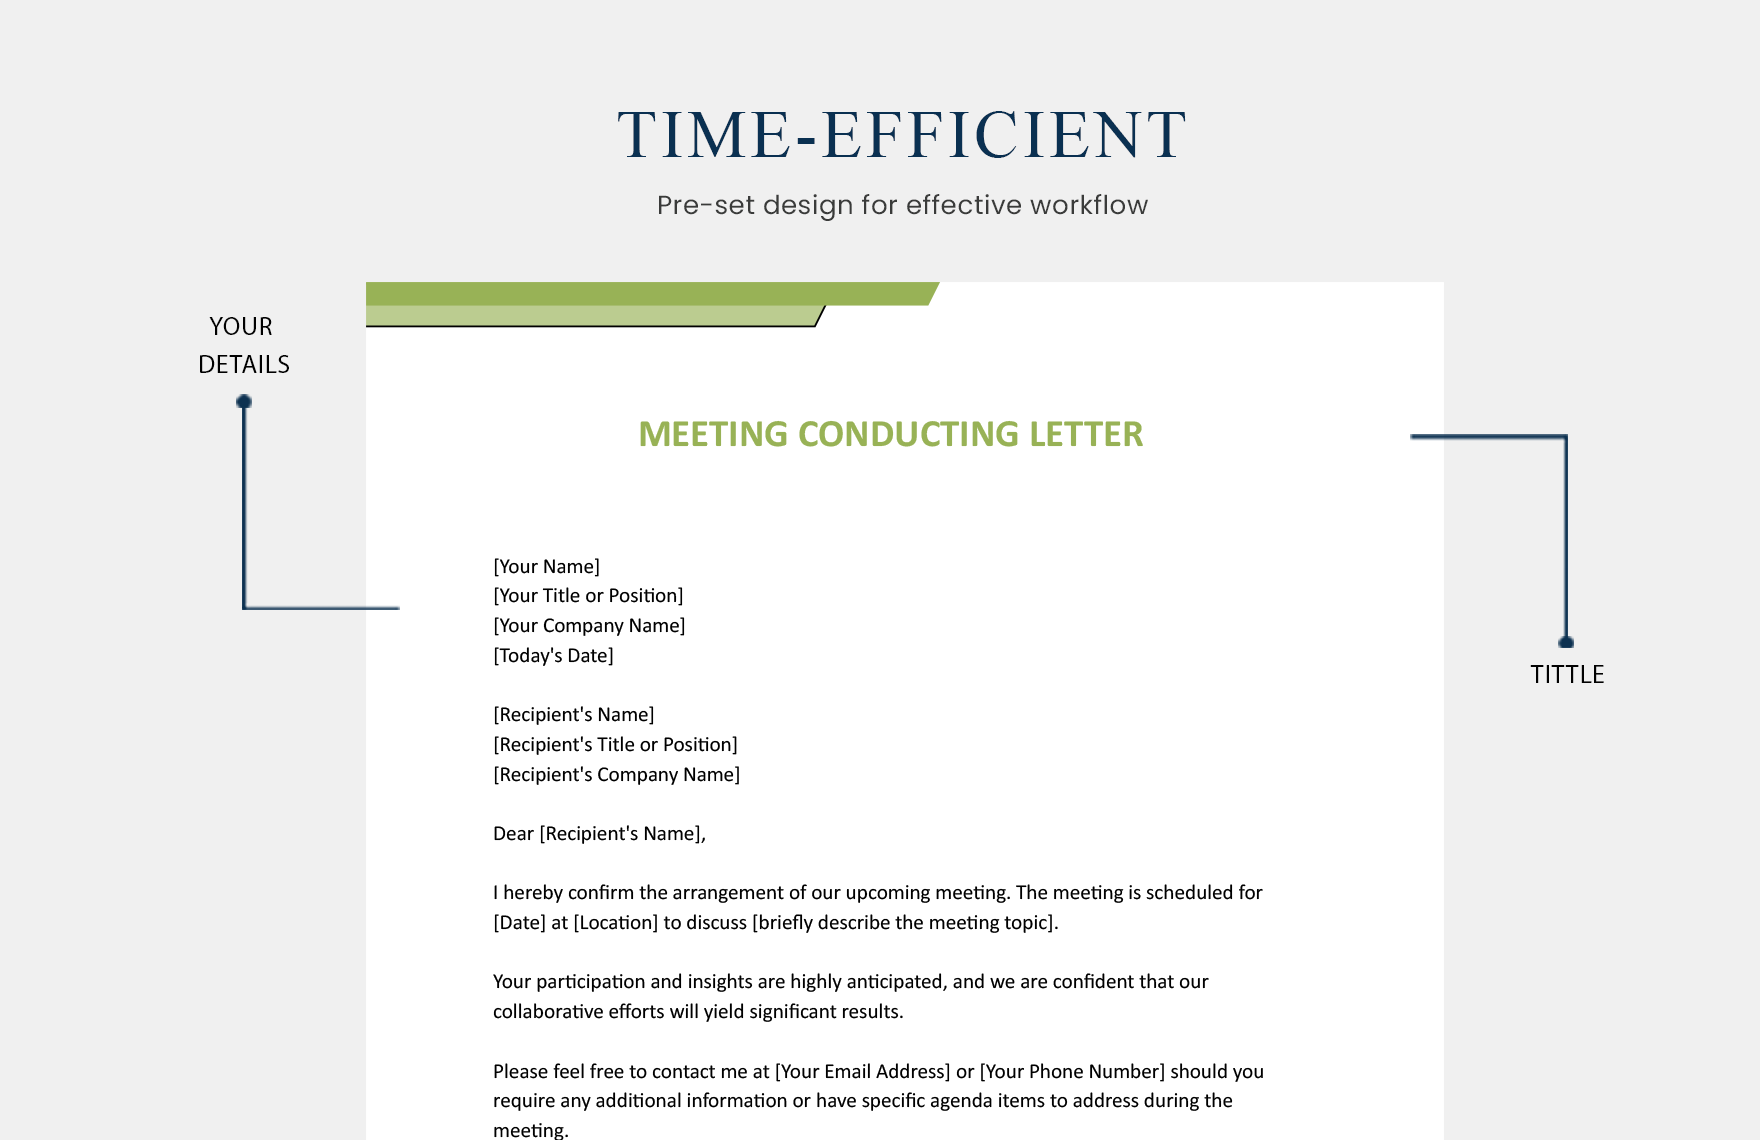 Meeting Conducting Letter